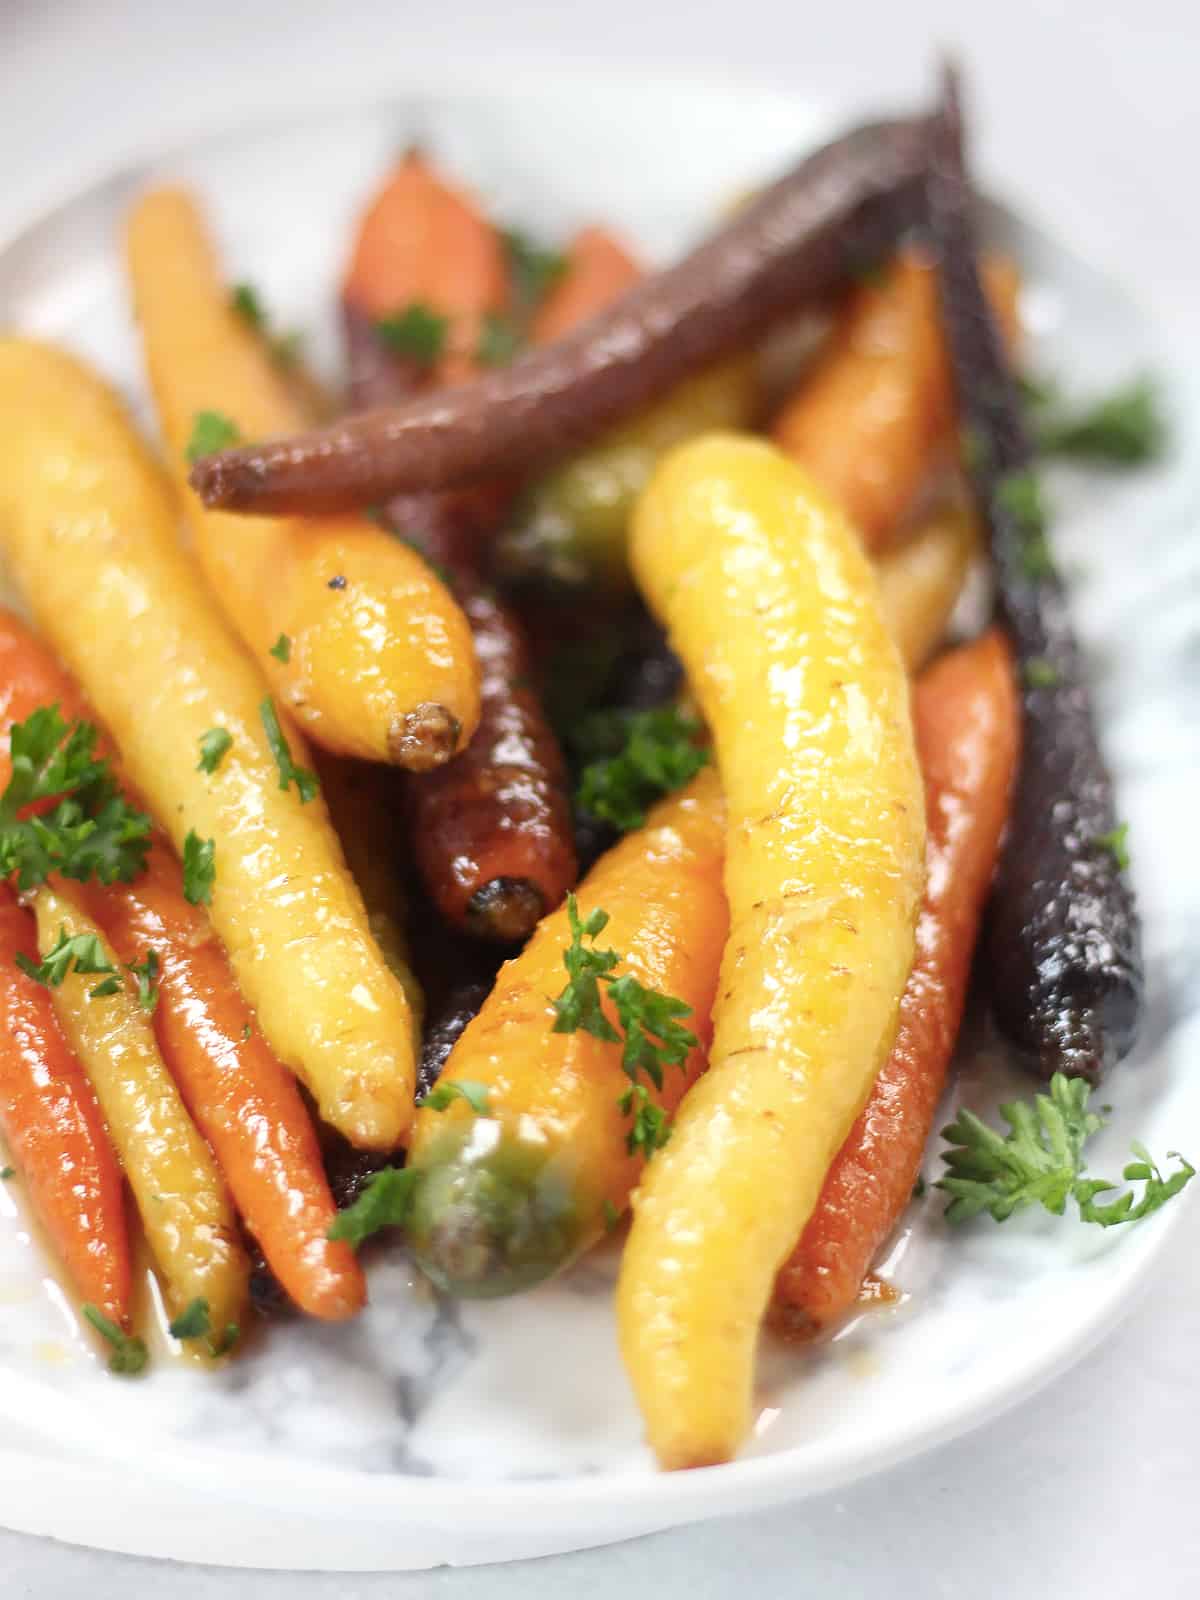 Yellow, red and orange glazed carrots.